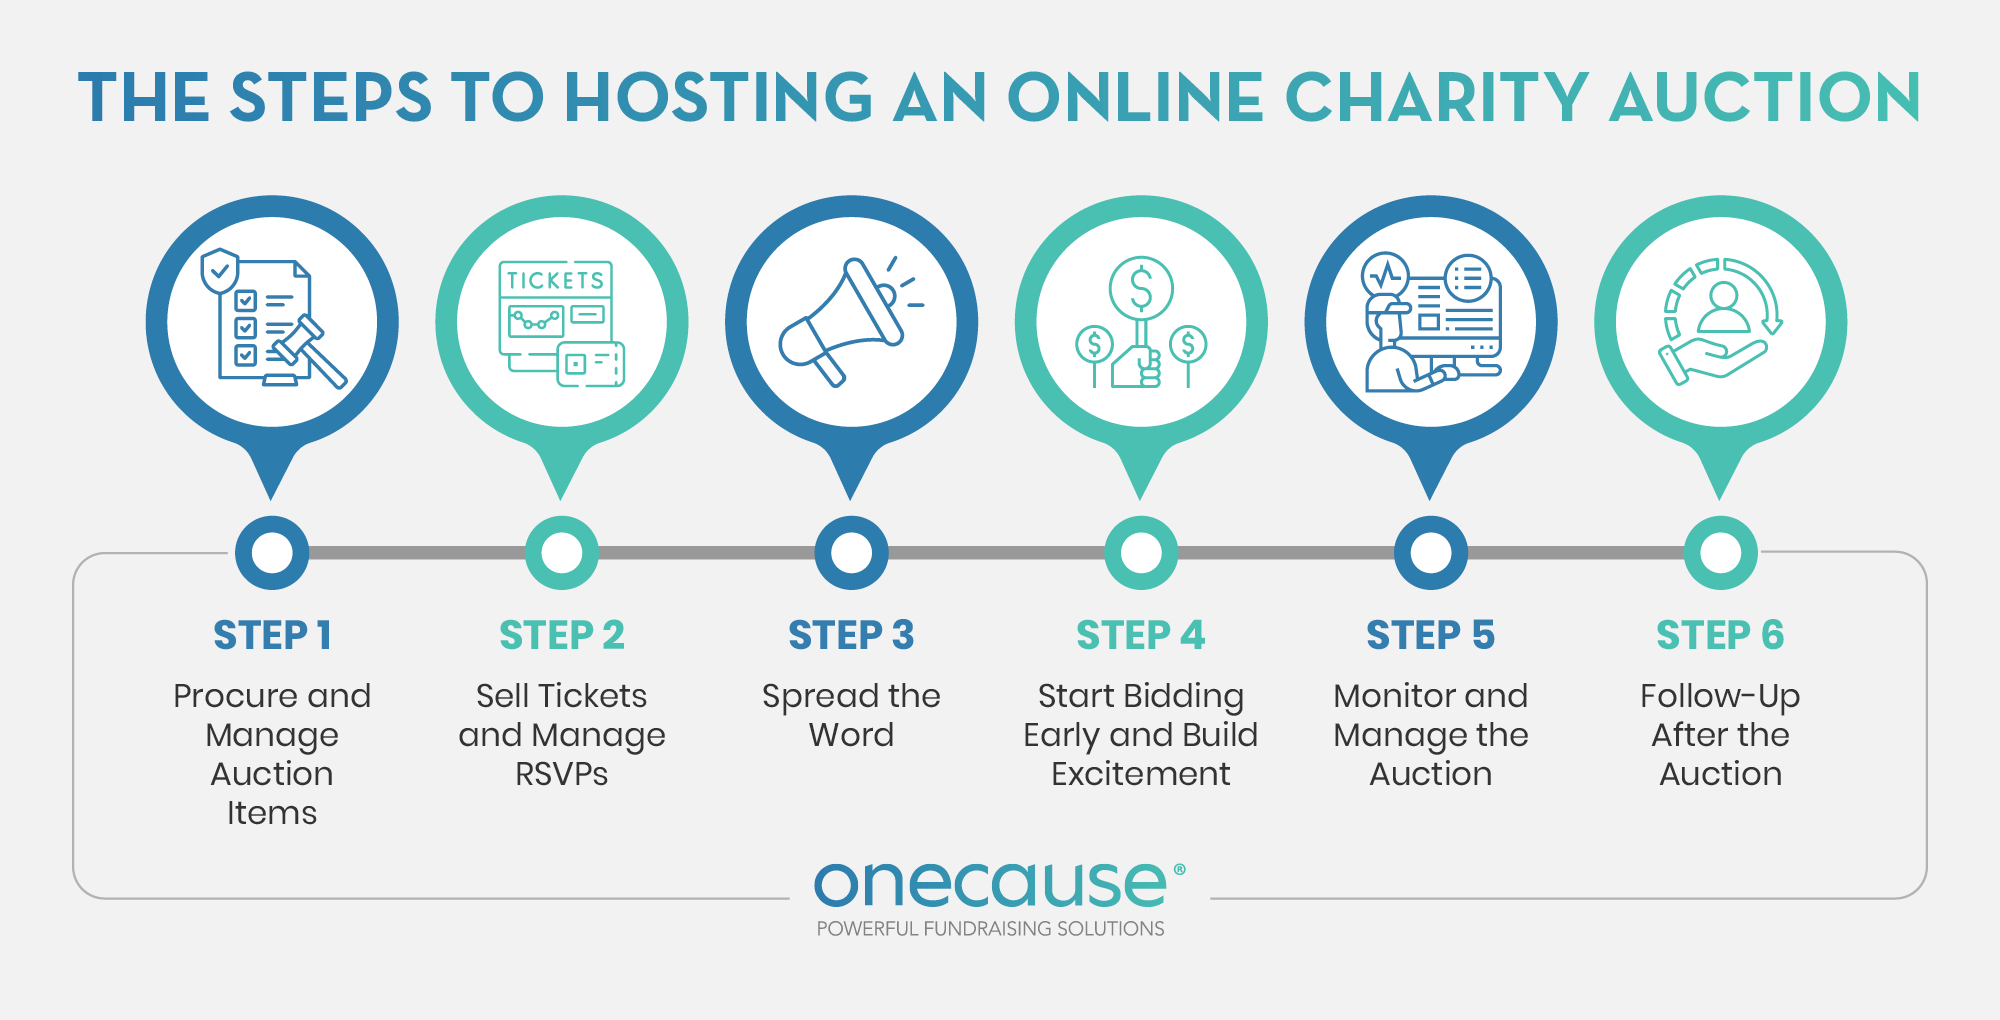 This image lists the steps to hosting an online charity auction, also detailed in the text below.